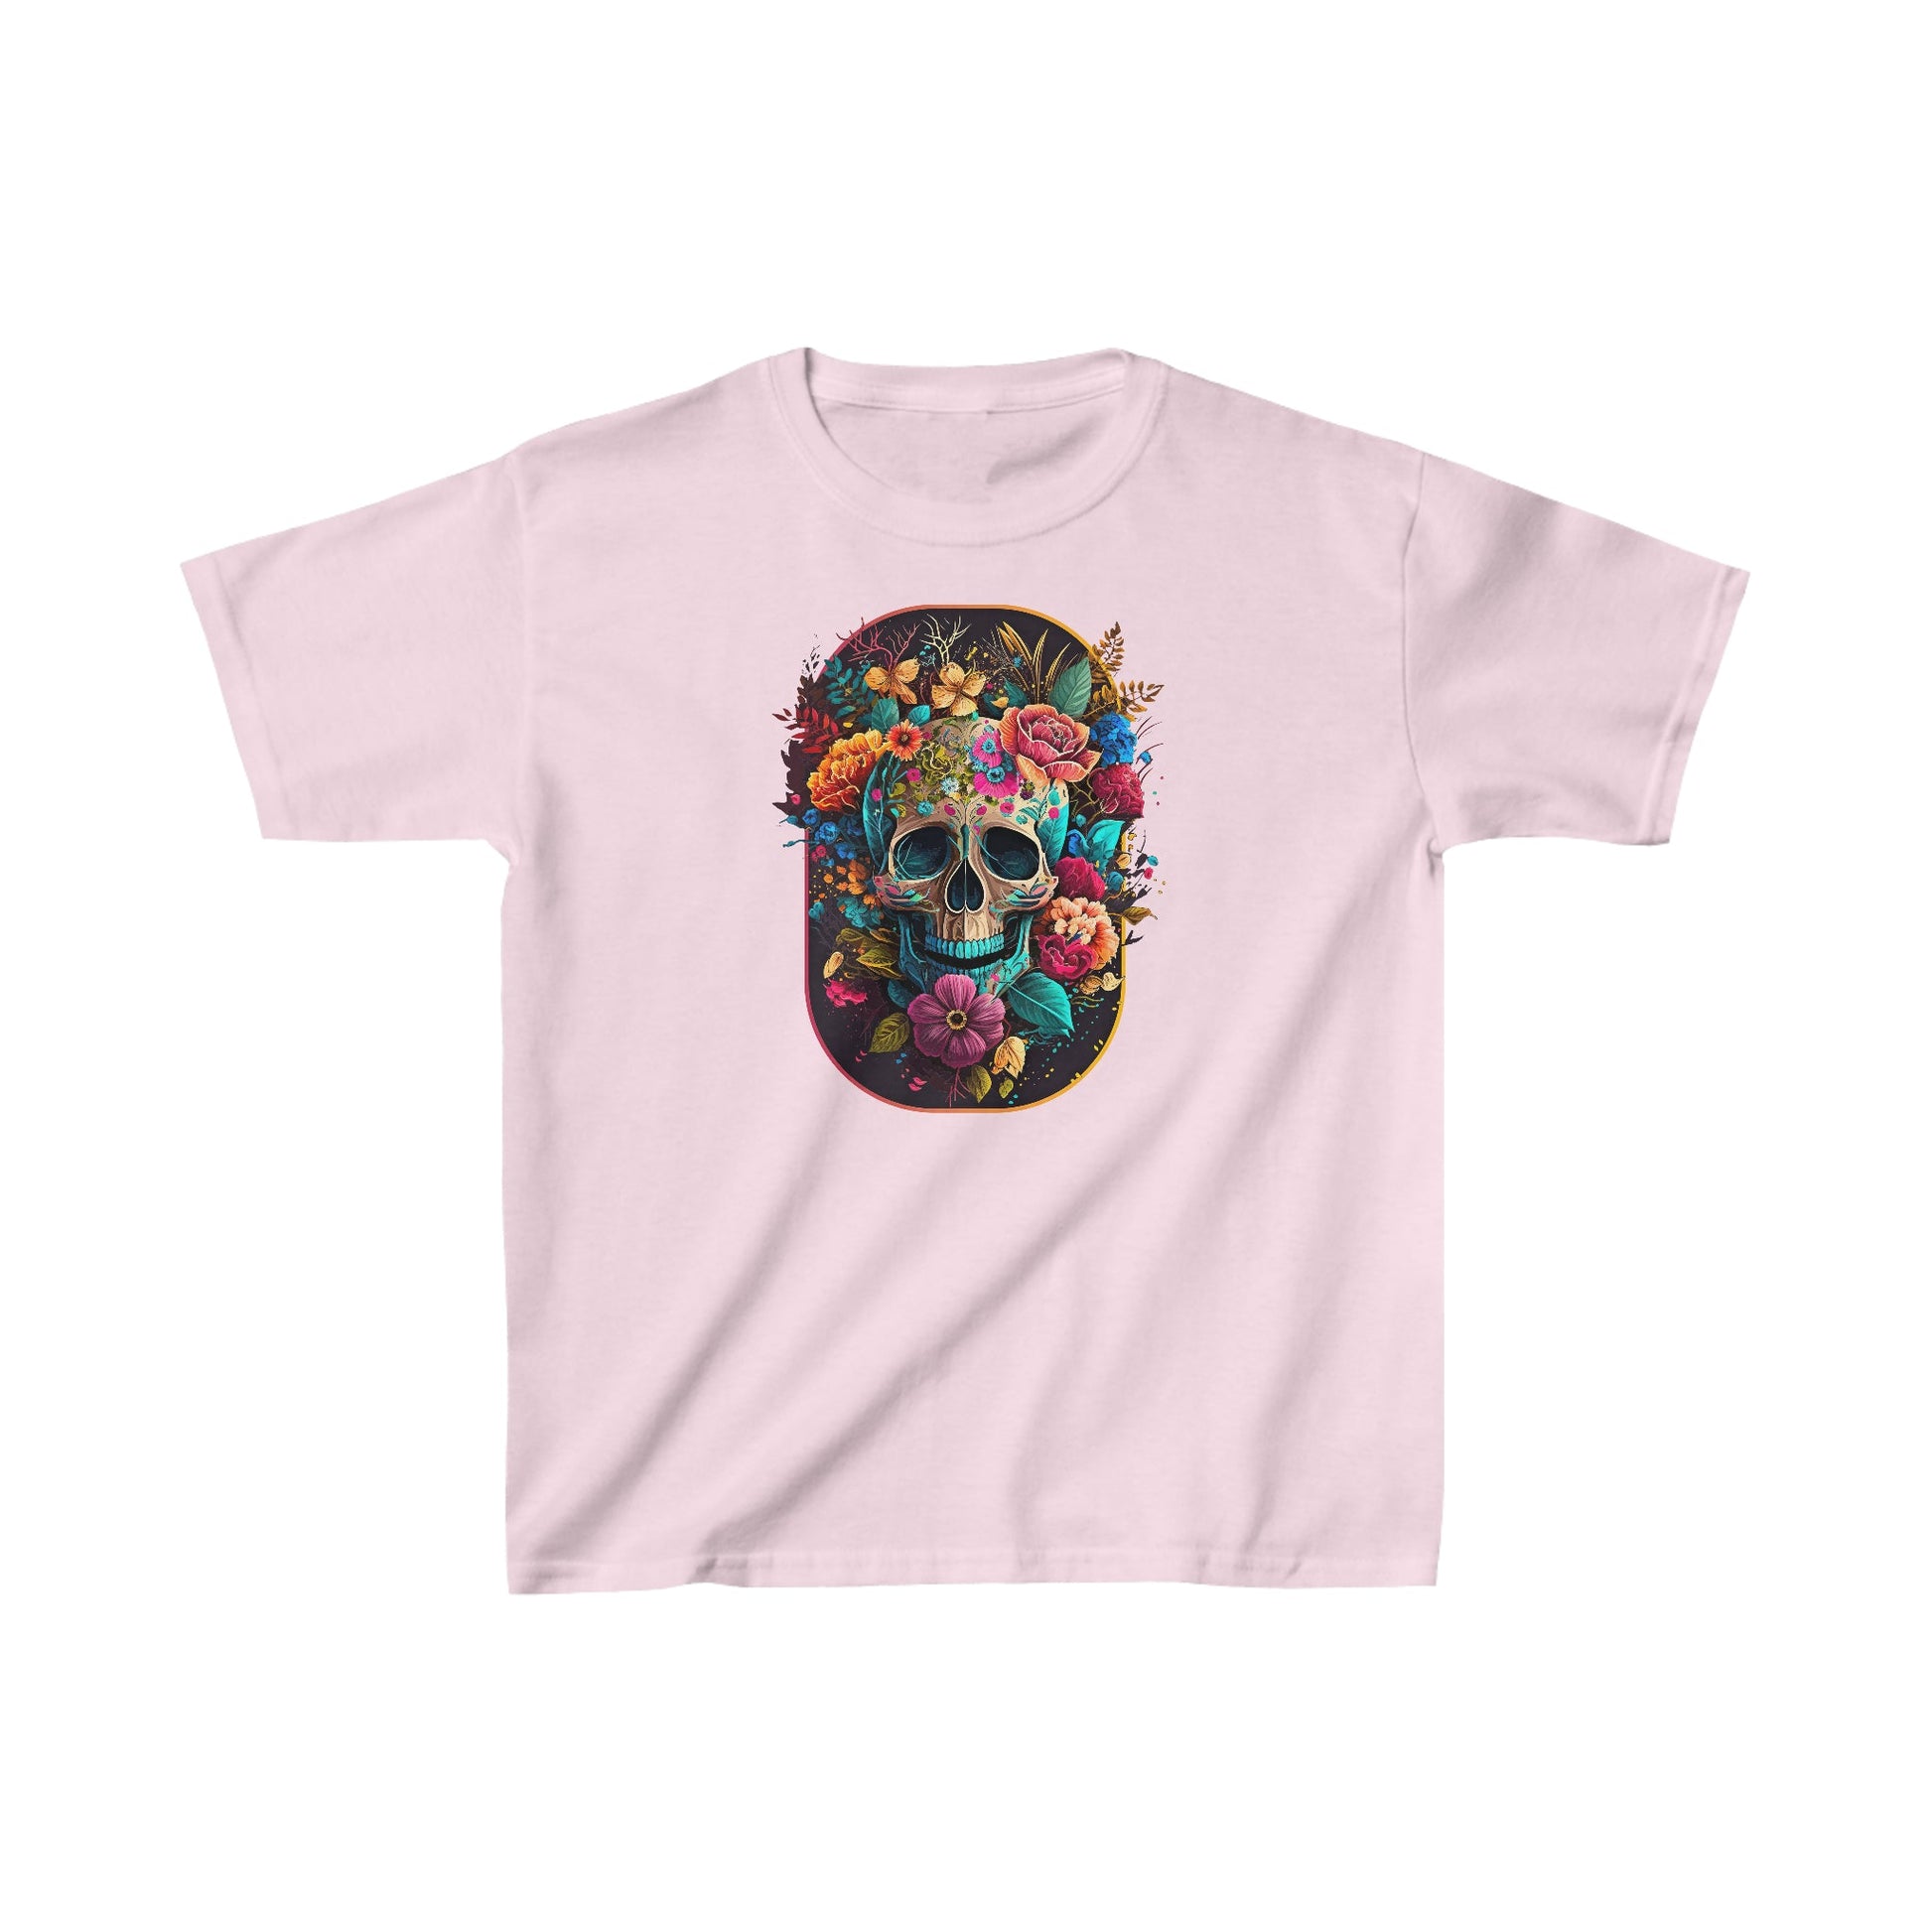 CrazyYetiClothing, CYC, Floral Skull (Kids Tee), Kids clothes